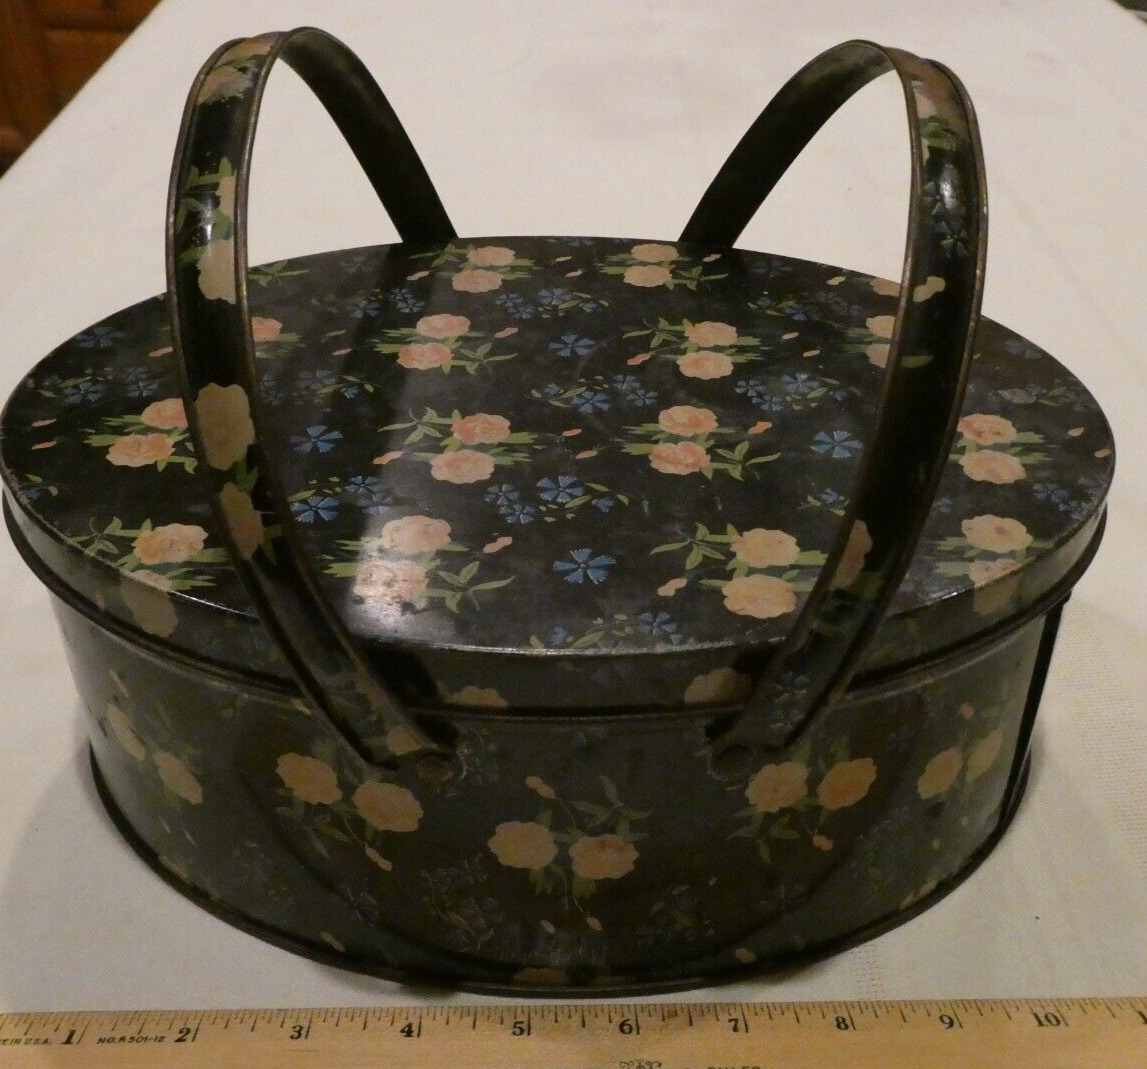 Vintage Old Antique Tin Metal Sewing Box With Handles Black Floral Pink Flowers